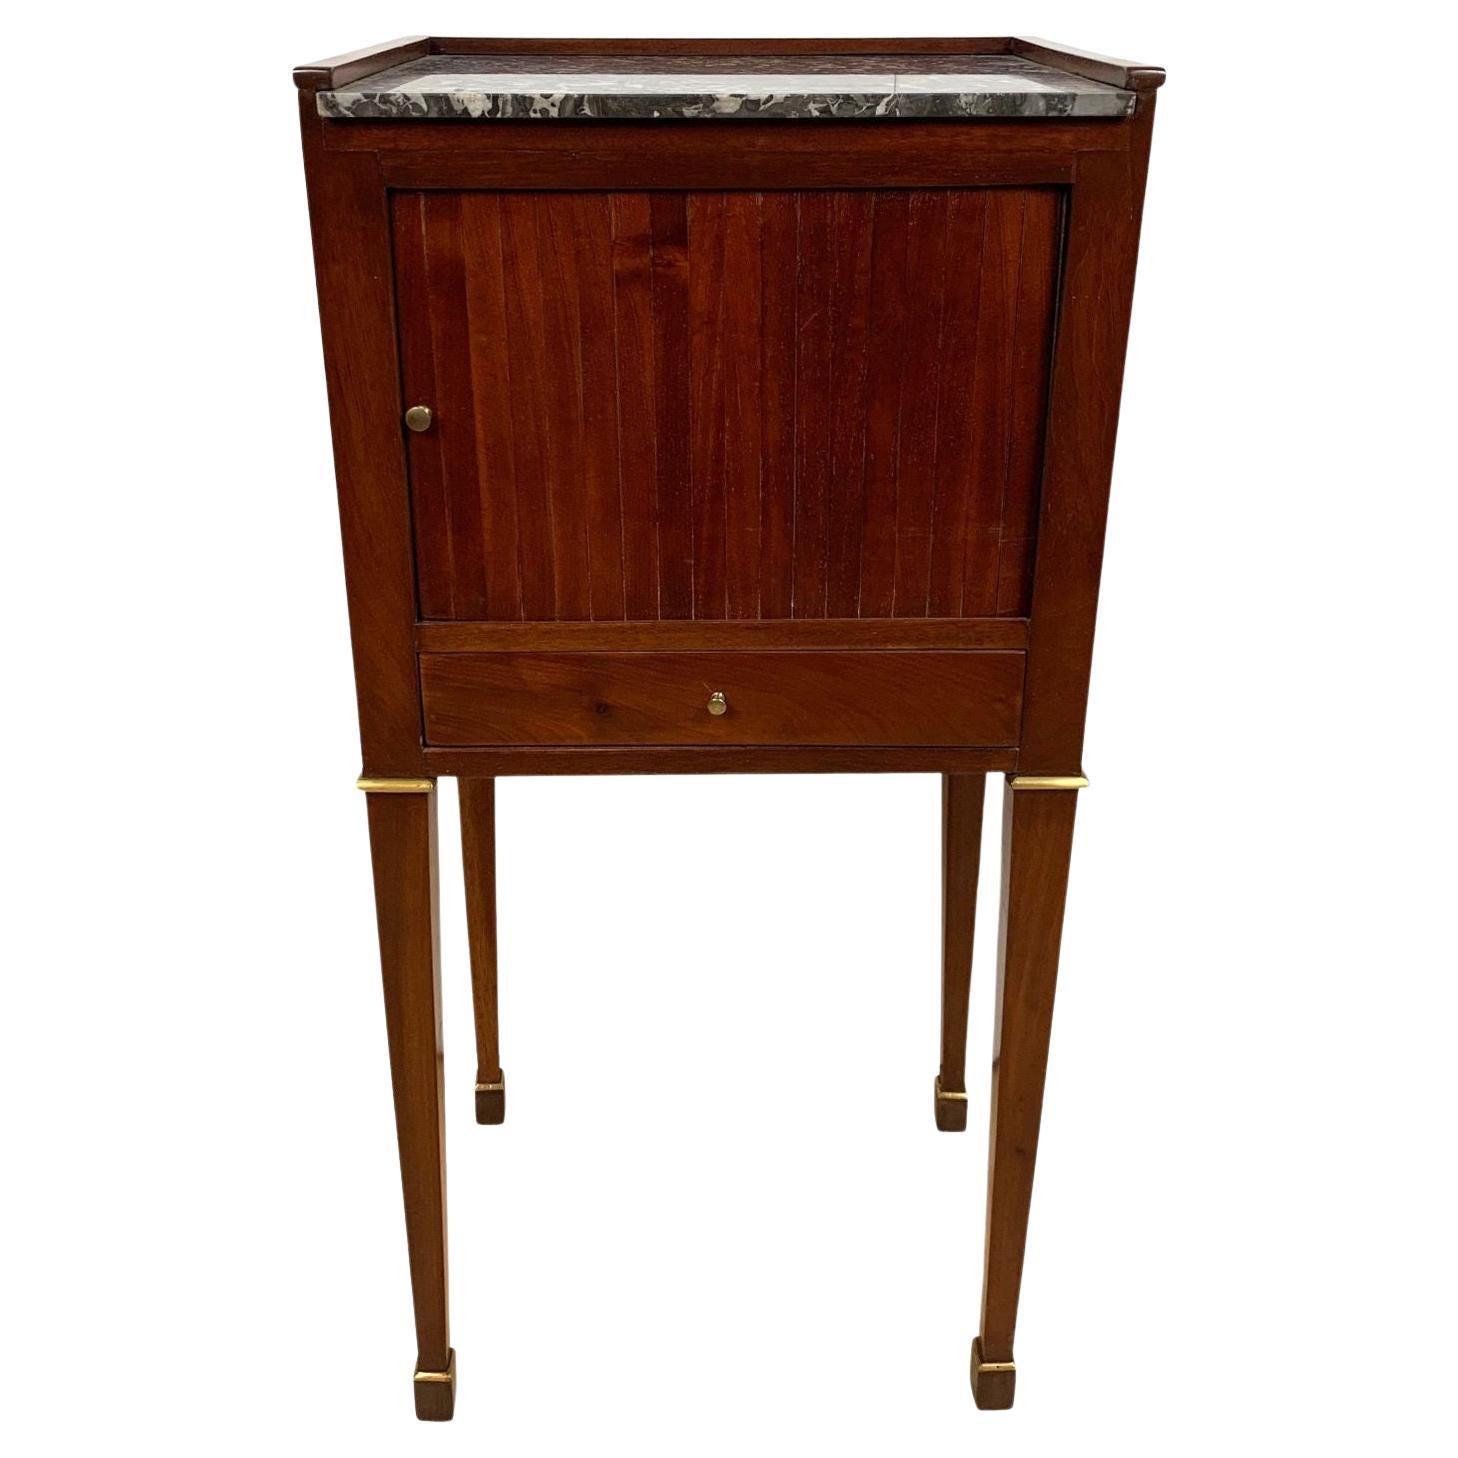 Early 19th Century Small Furniture or Nightstand, France circa 1820